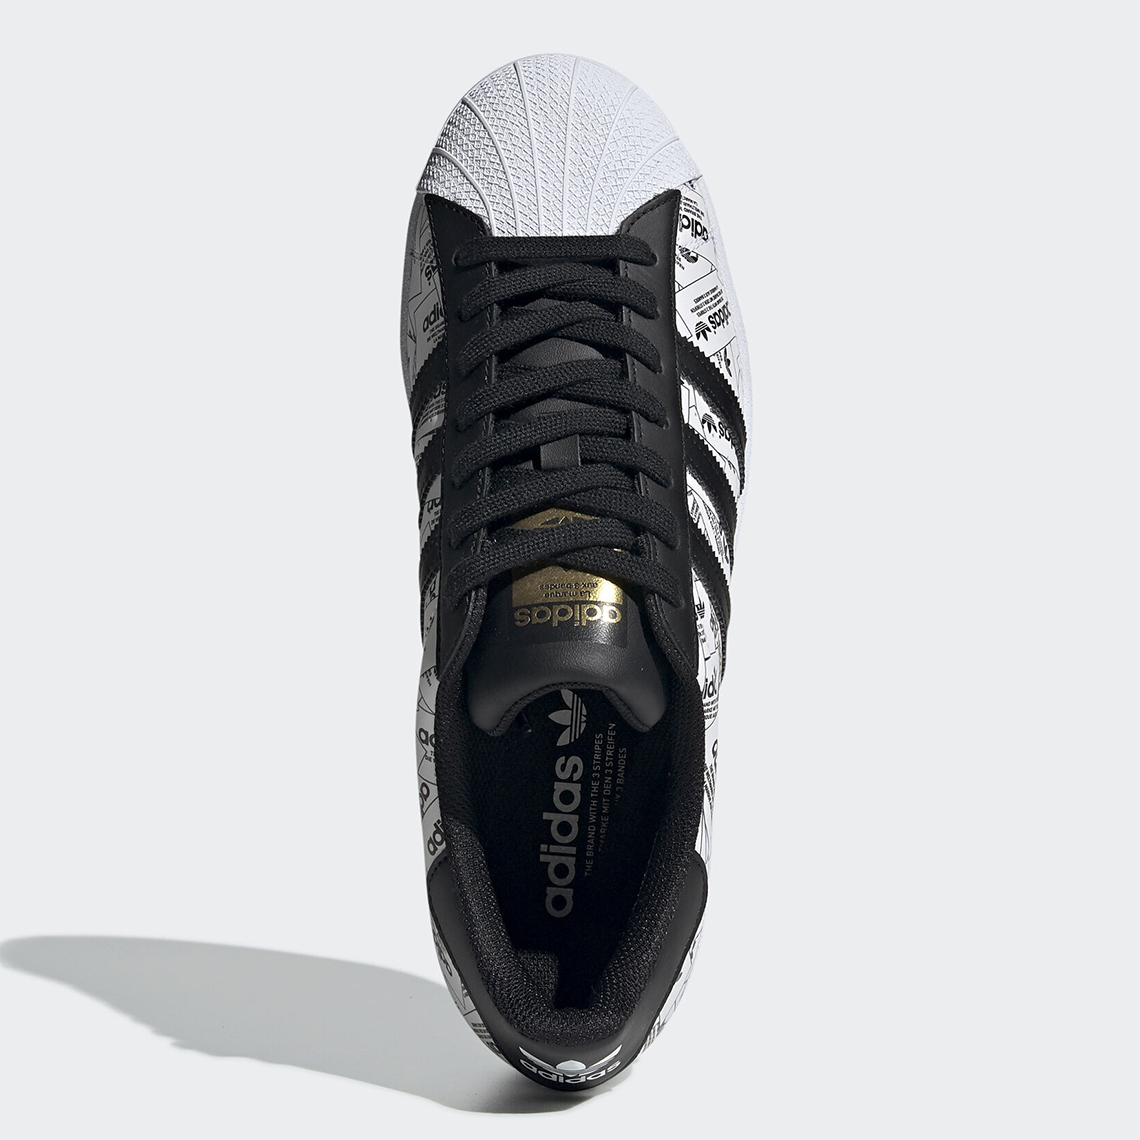 adidas Superstar All Over Release FV2819 Print Date